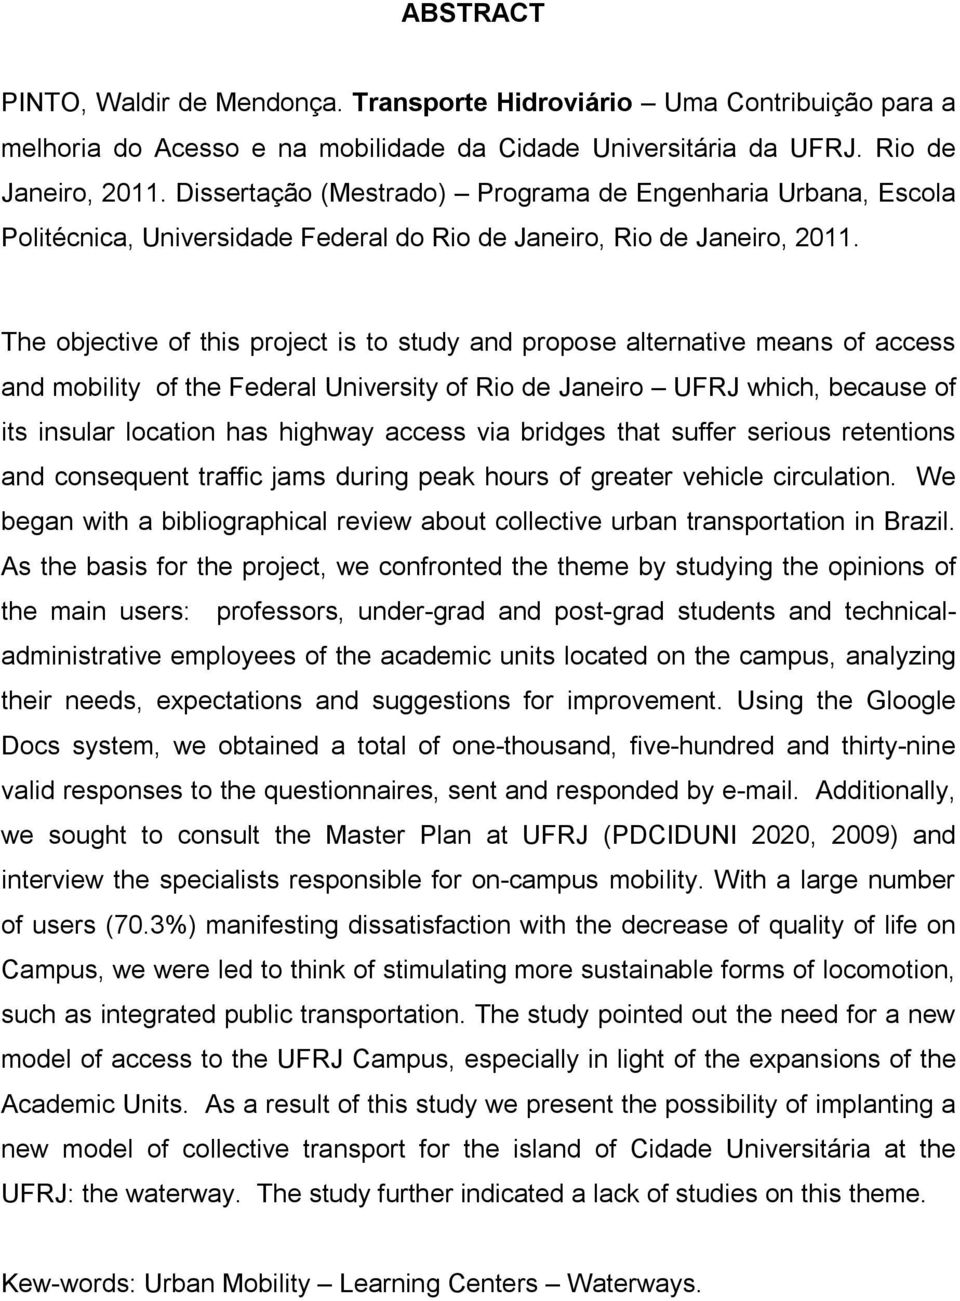 The objective of this project is to study and propose alternative means of access and mobility of the Federal University of Rio de Janeiro UFRJ which, because of its insular location has highway